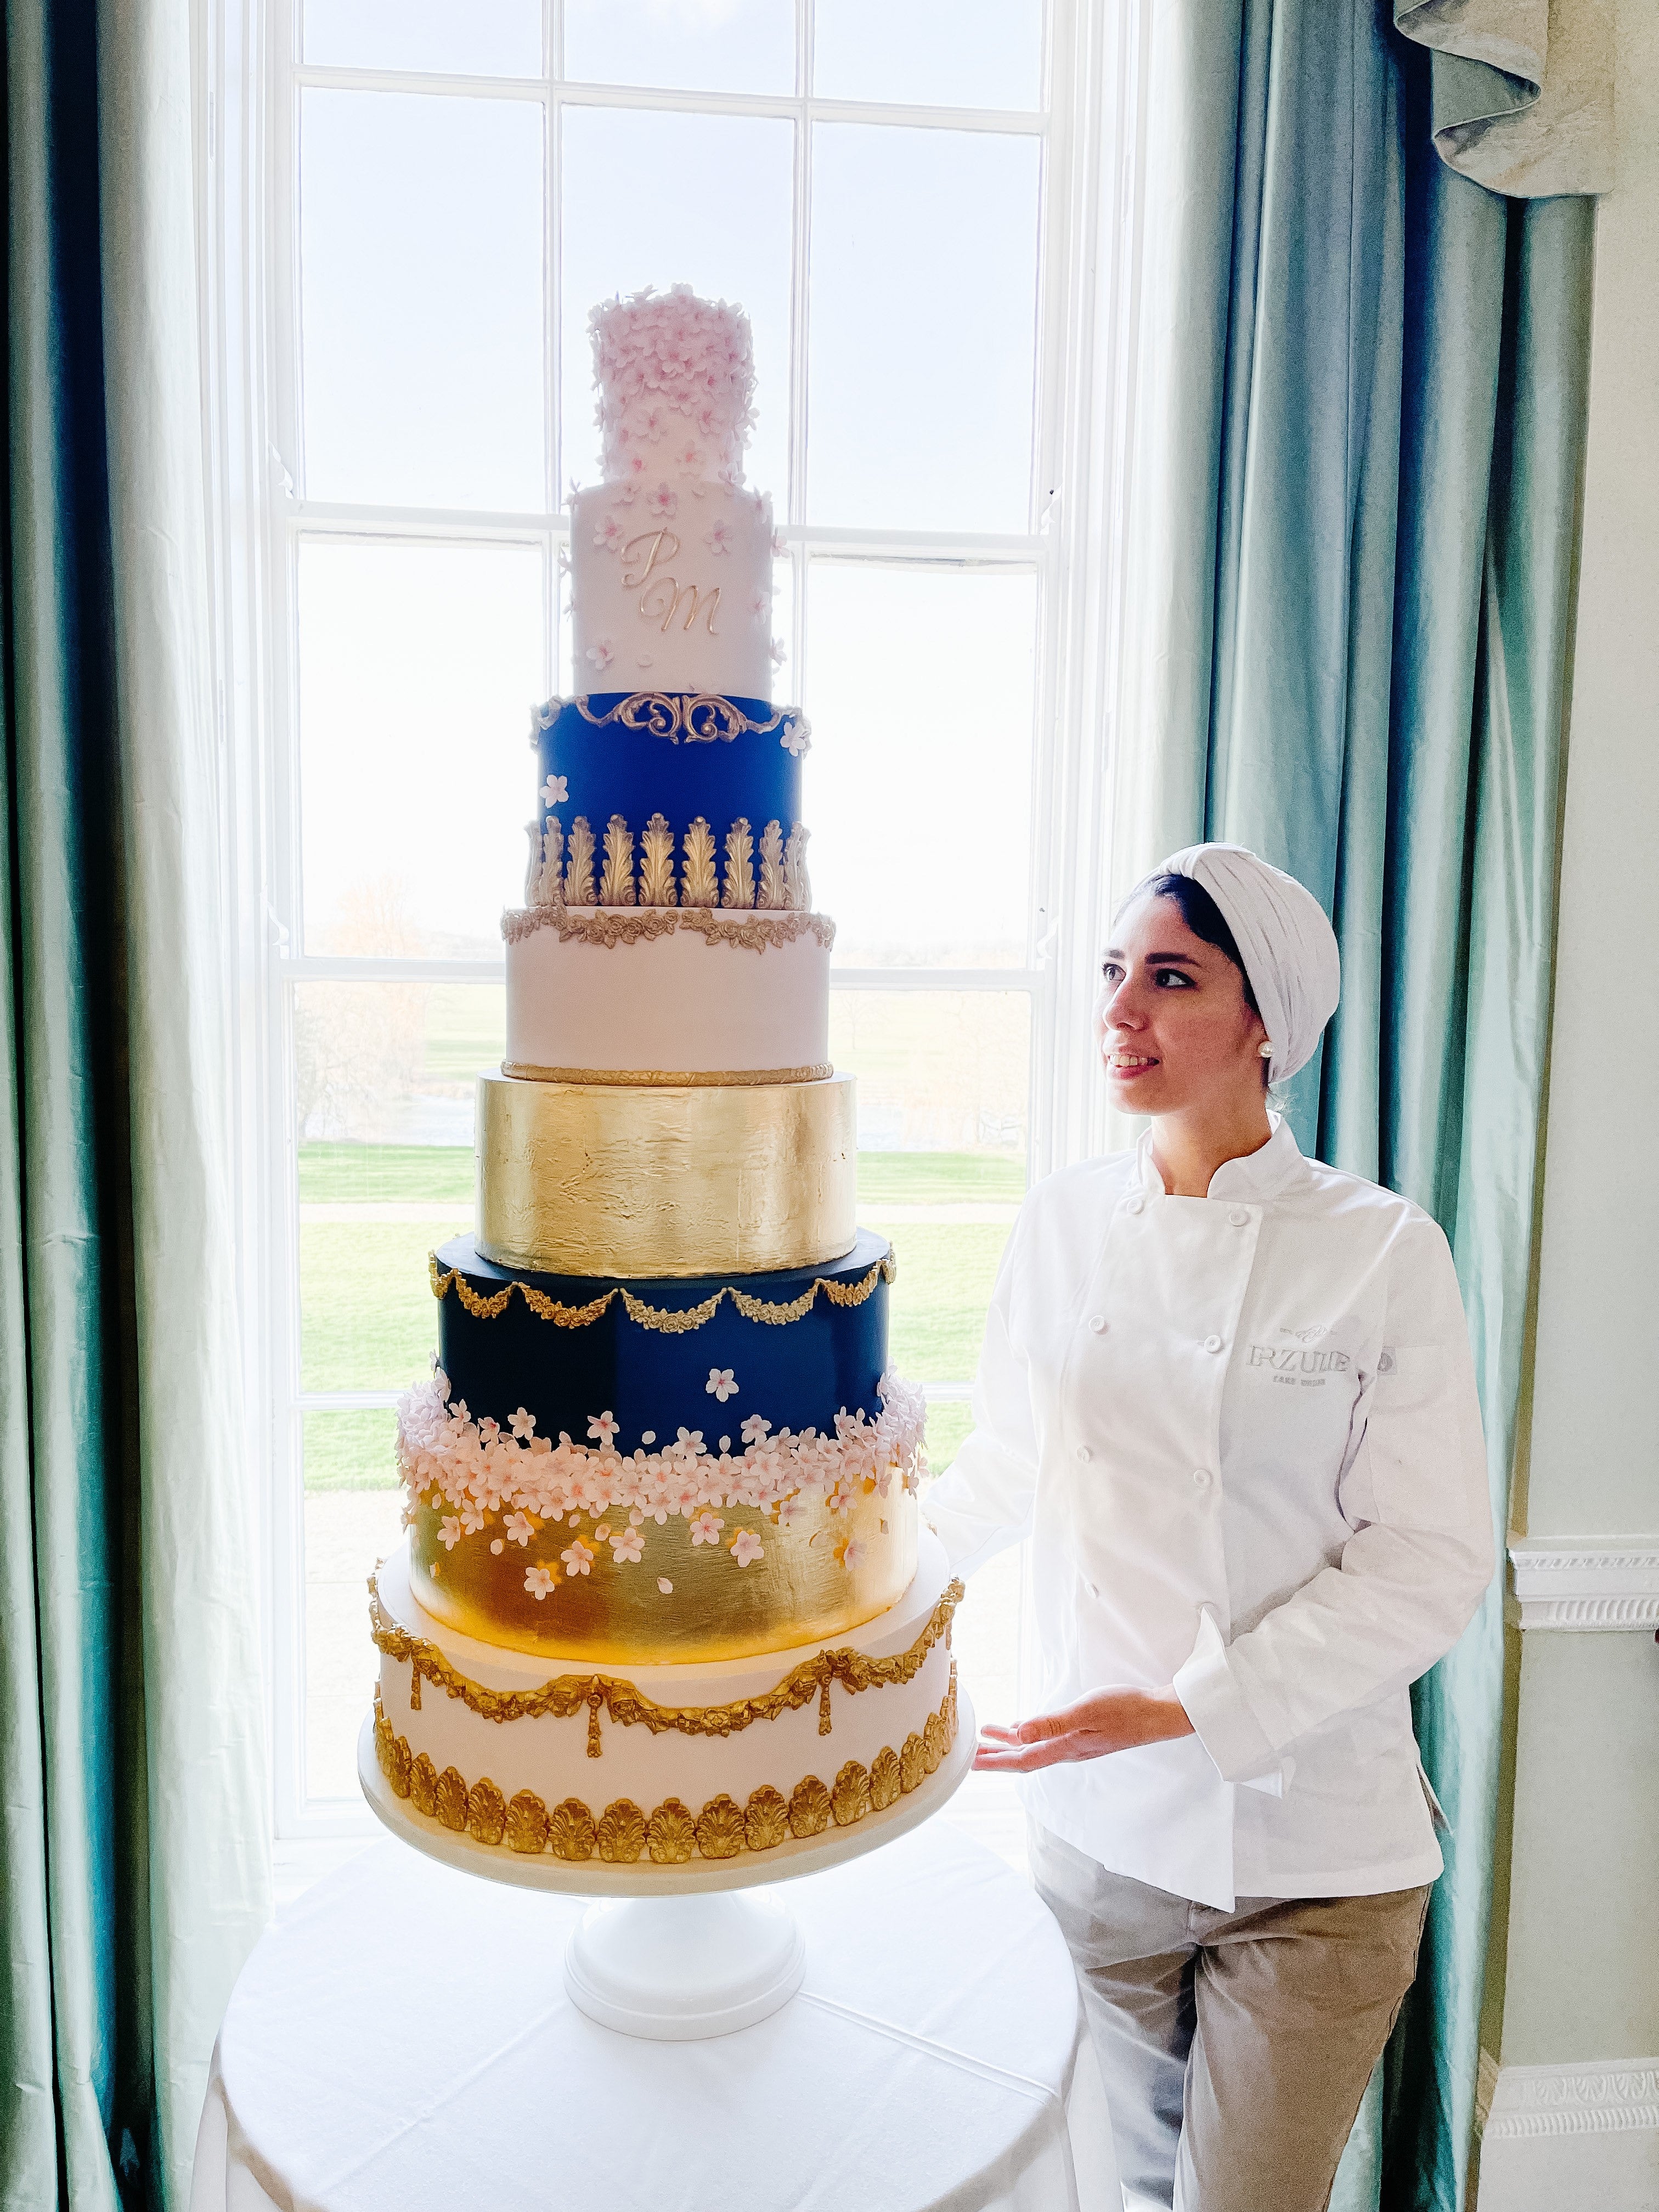 Who won Britain's Best Bakery 2014? The Cake Shop Bakery with their  fantastic Wedding Cake – The Talent Zone